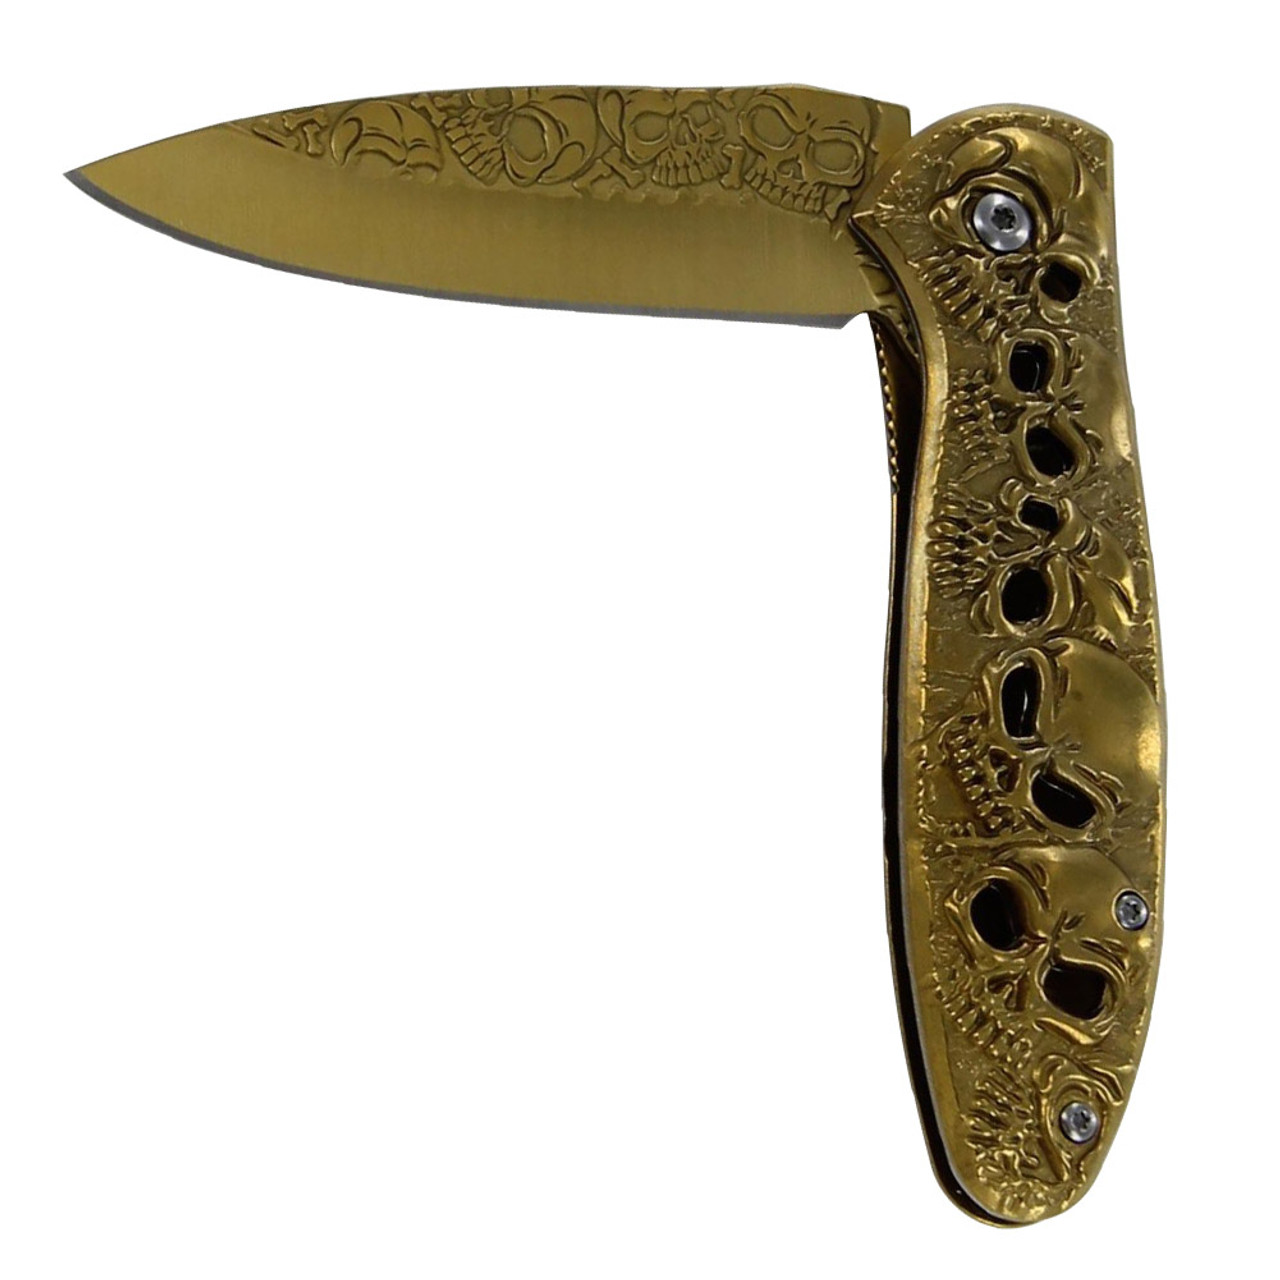 SE Spring Assisted Drop Point Folding Knife with Psychedelic